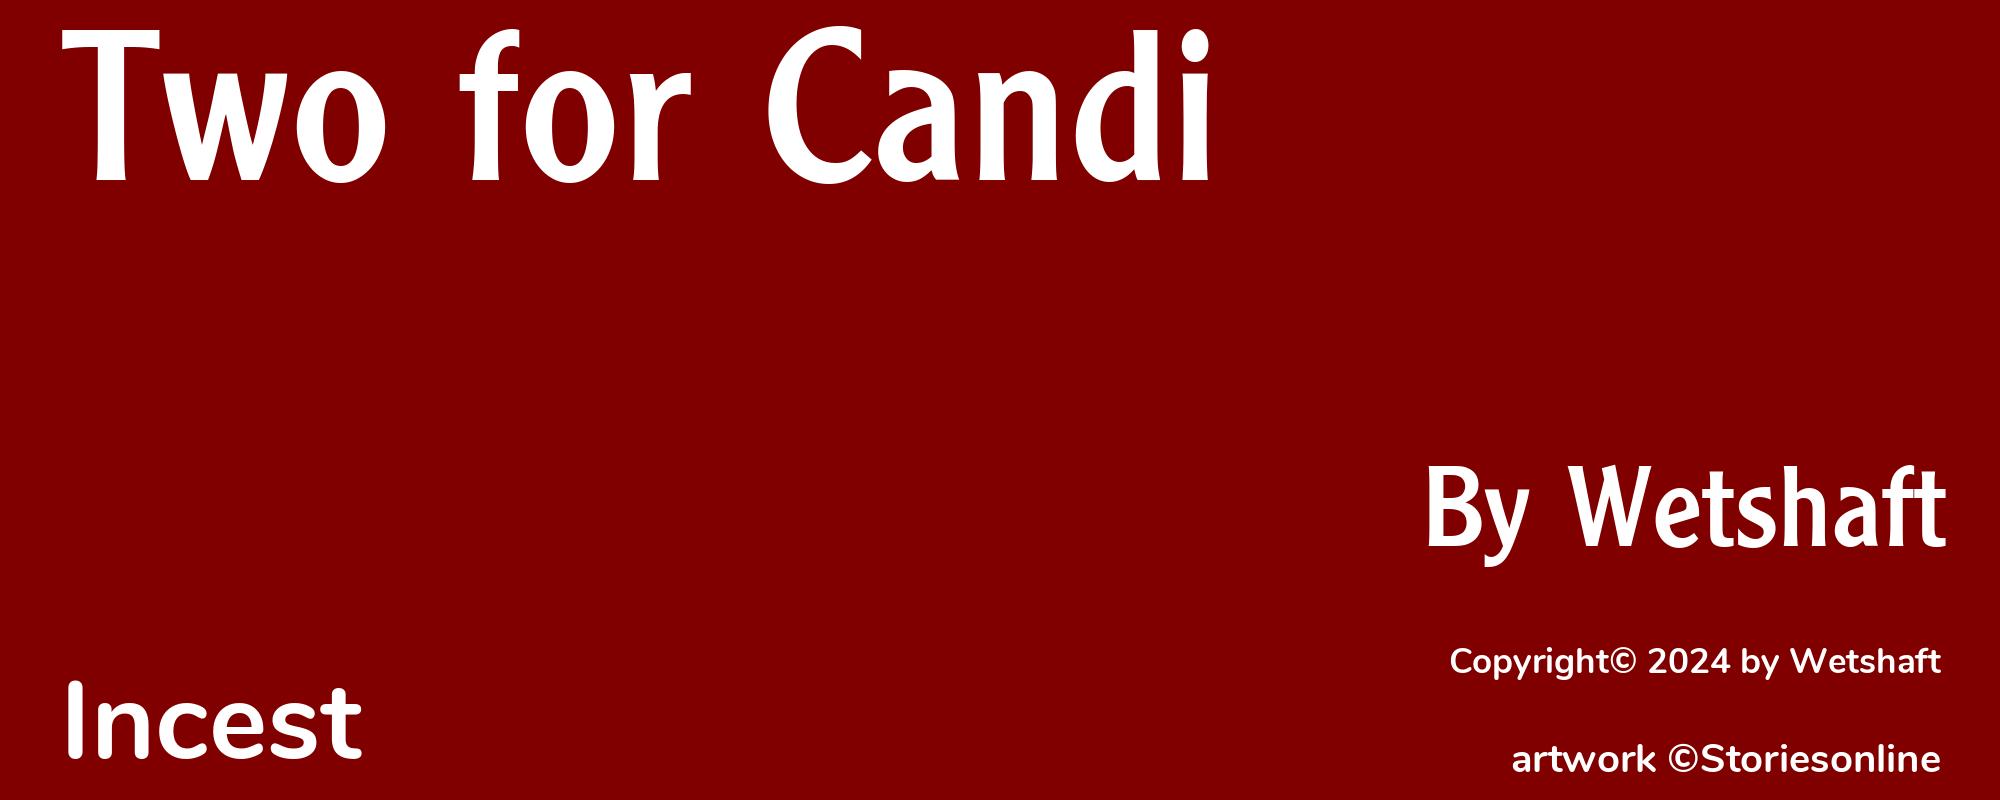 Two for Candi - Cover